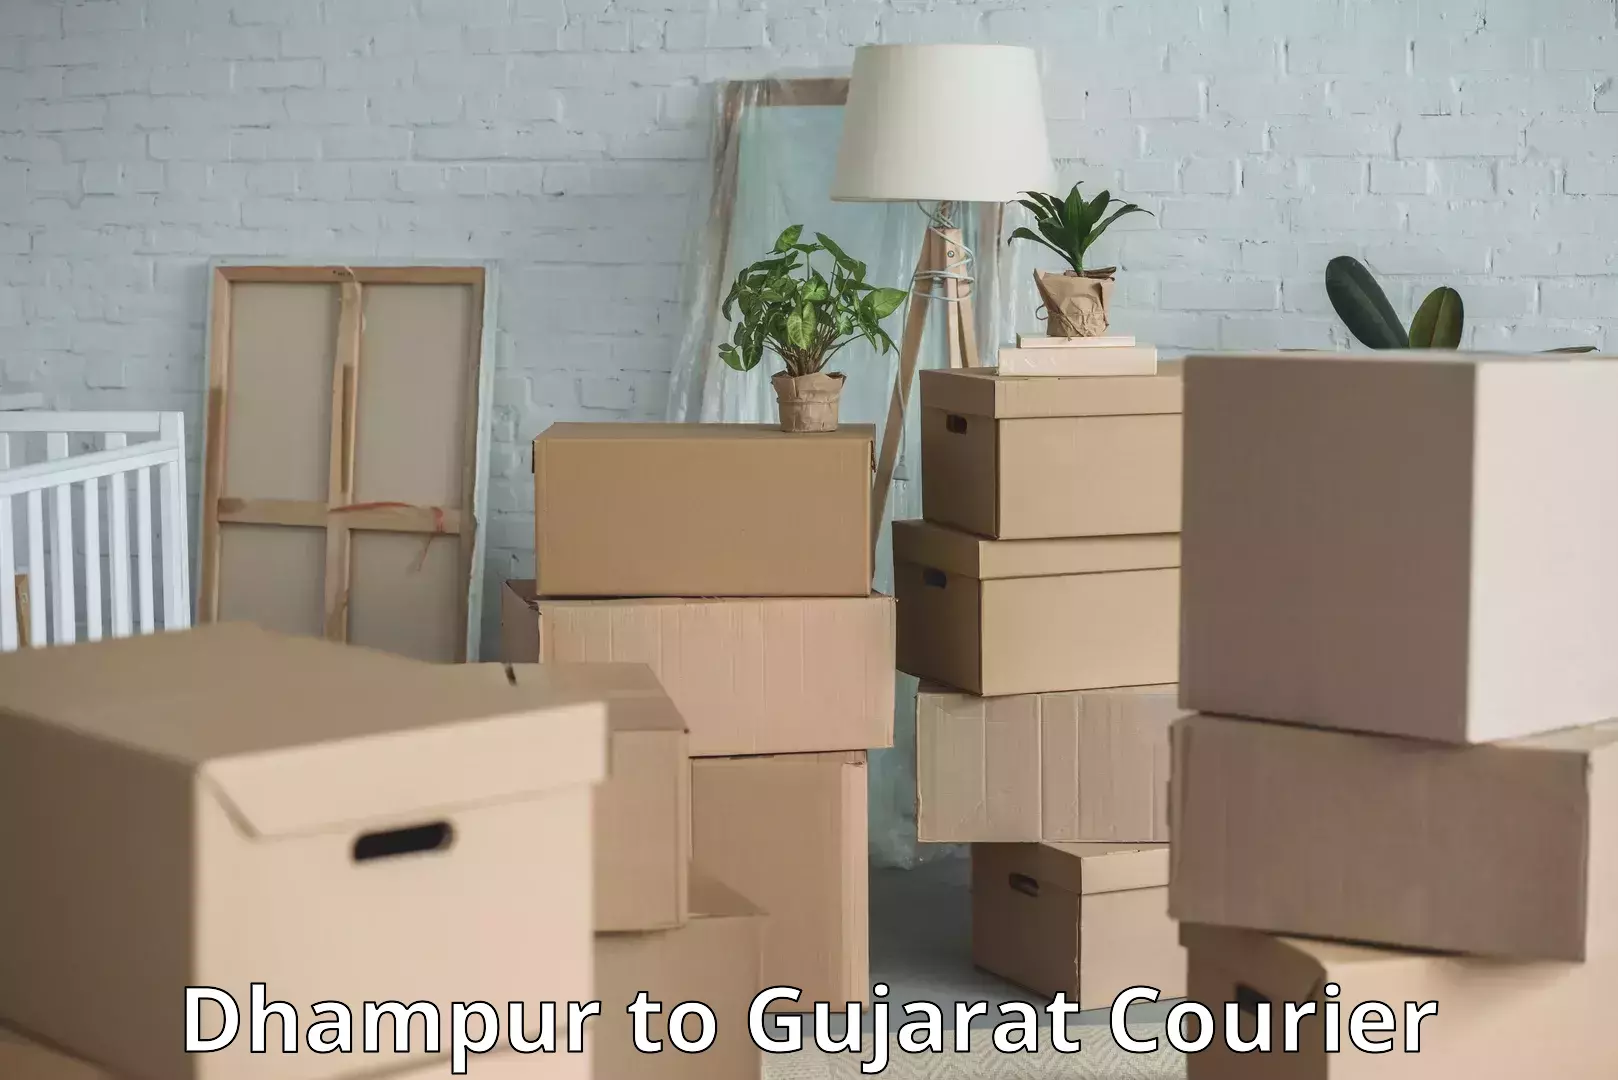 Luggage transport consultancy Dhampur to Gujarat